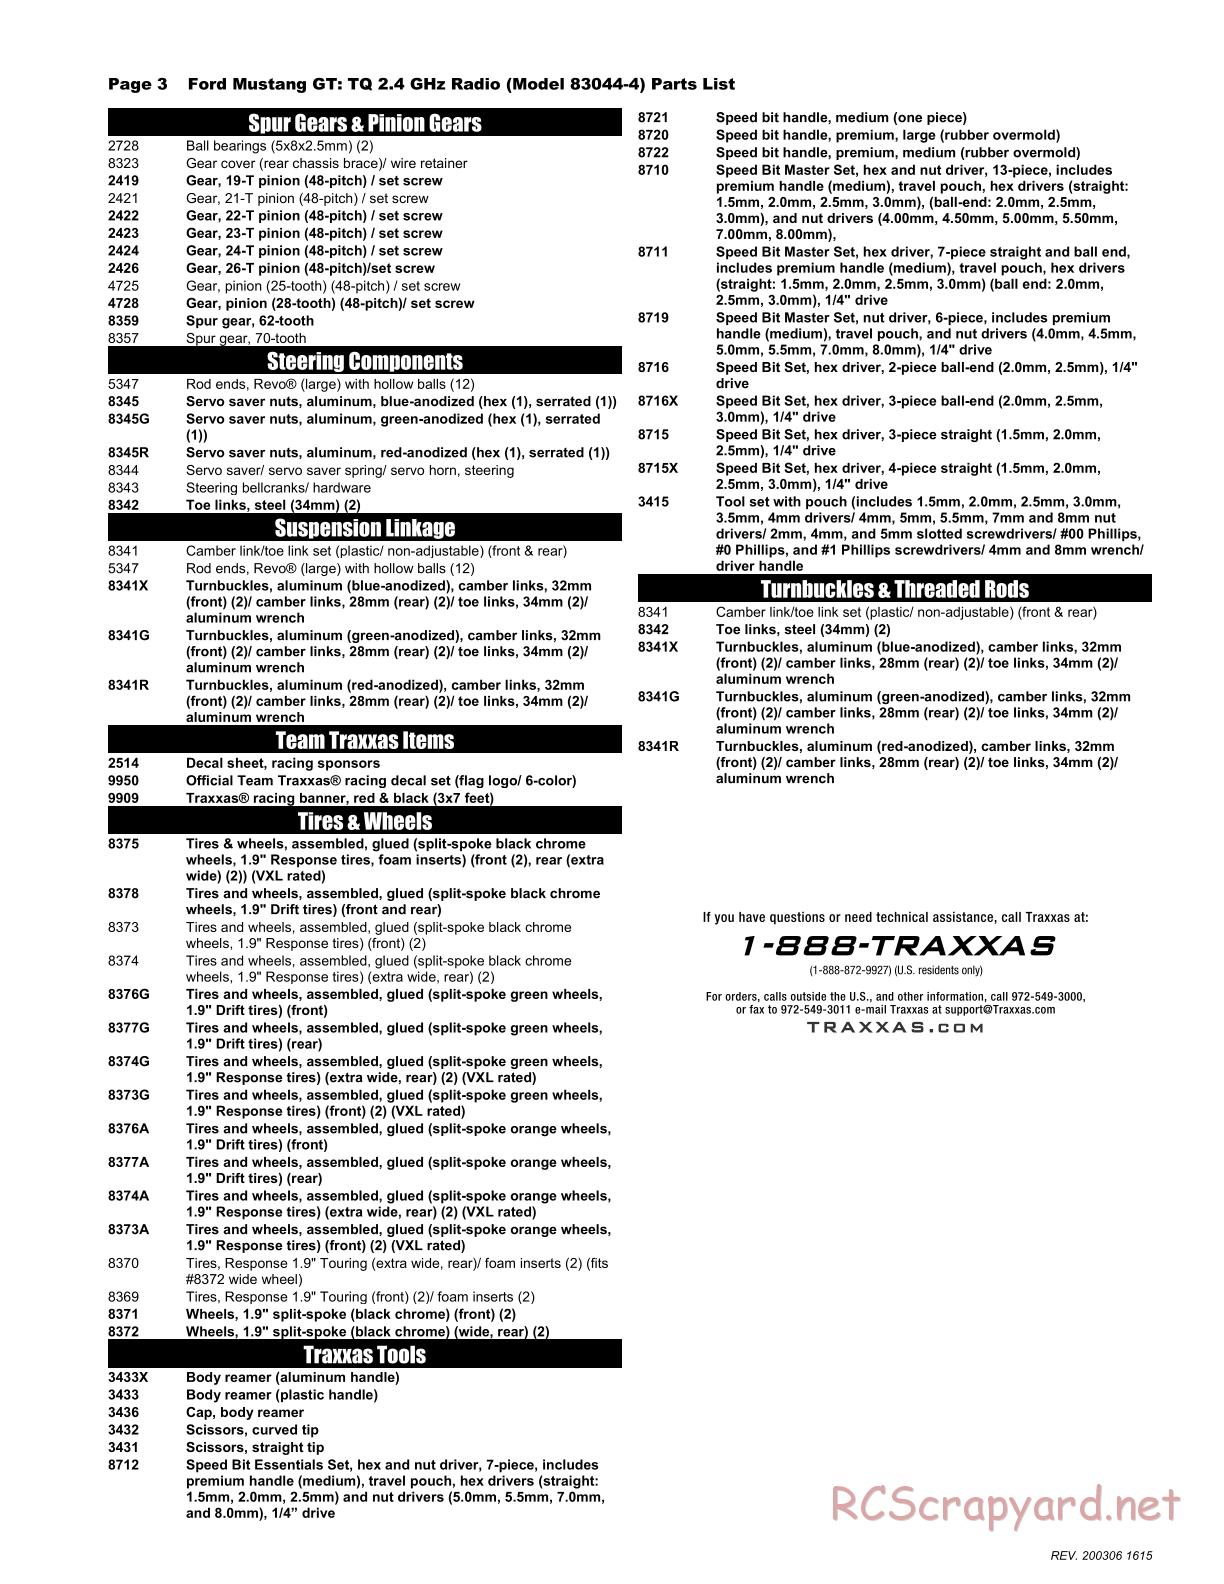 Traxxas - Ford Mustang GT - Parts List - Page 3